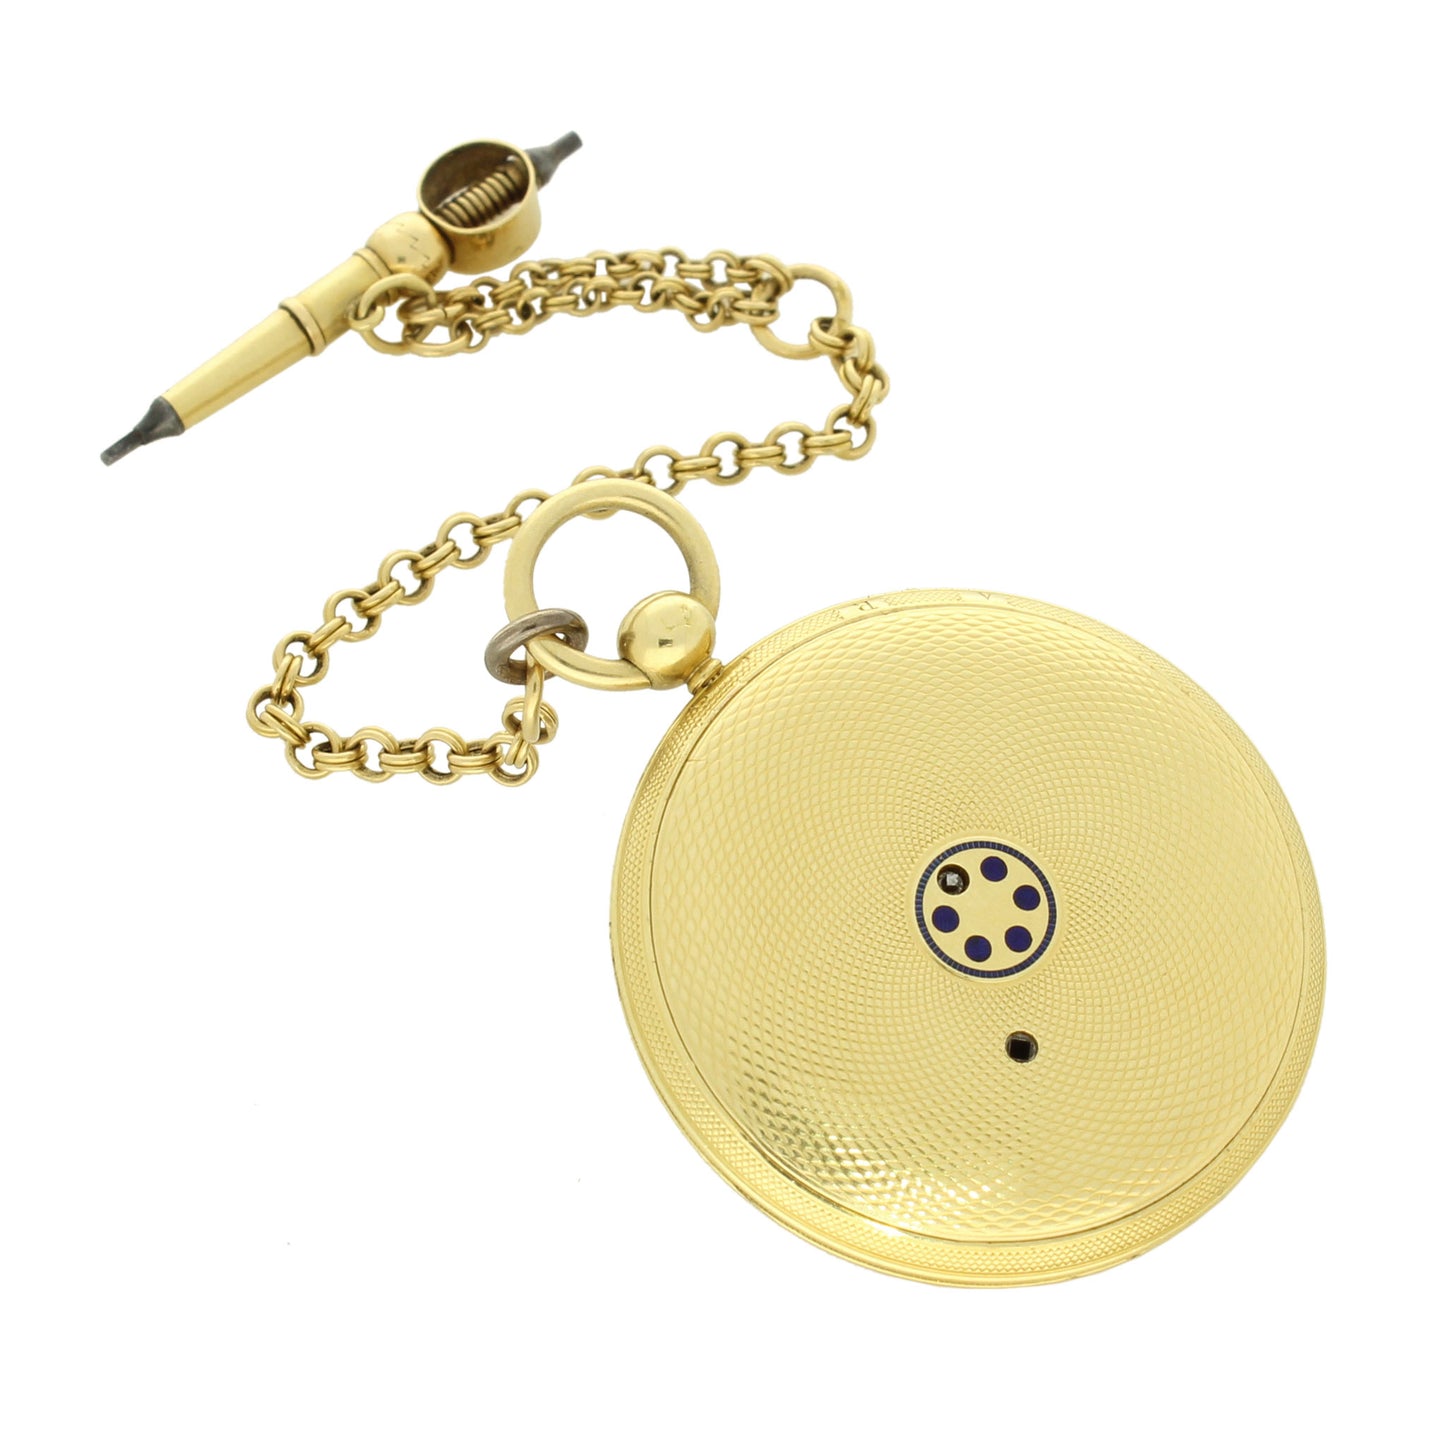 18ct yellow gold miniature open face pocket watch with chain. Made 1840’s